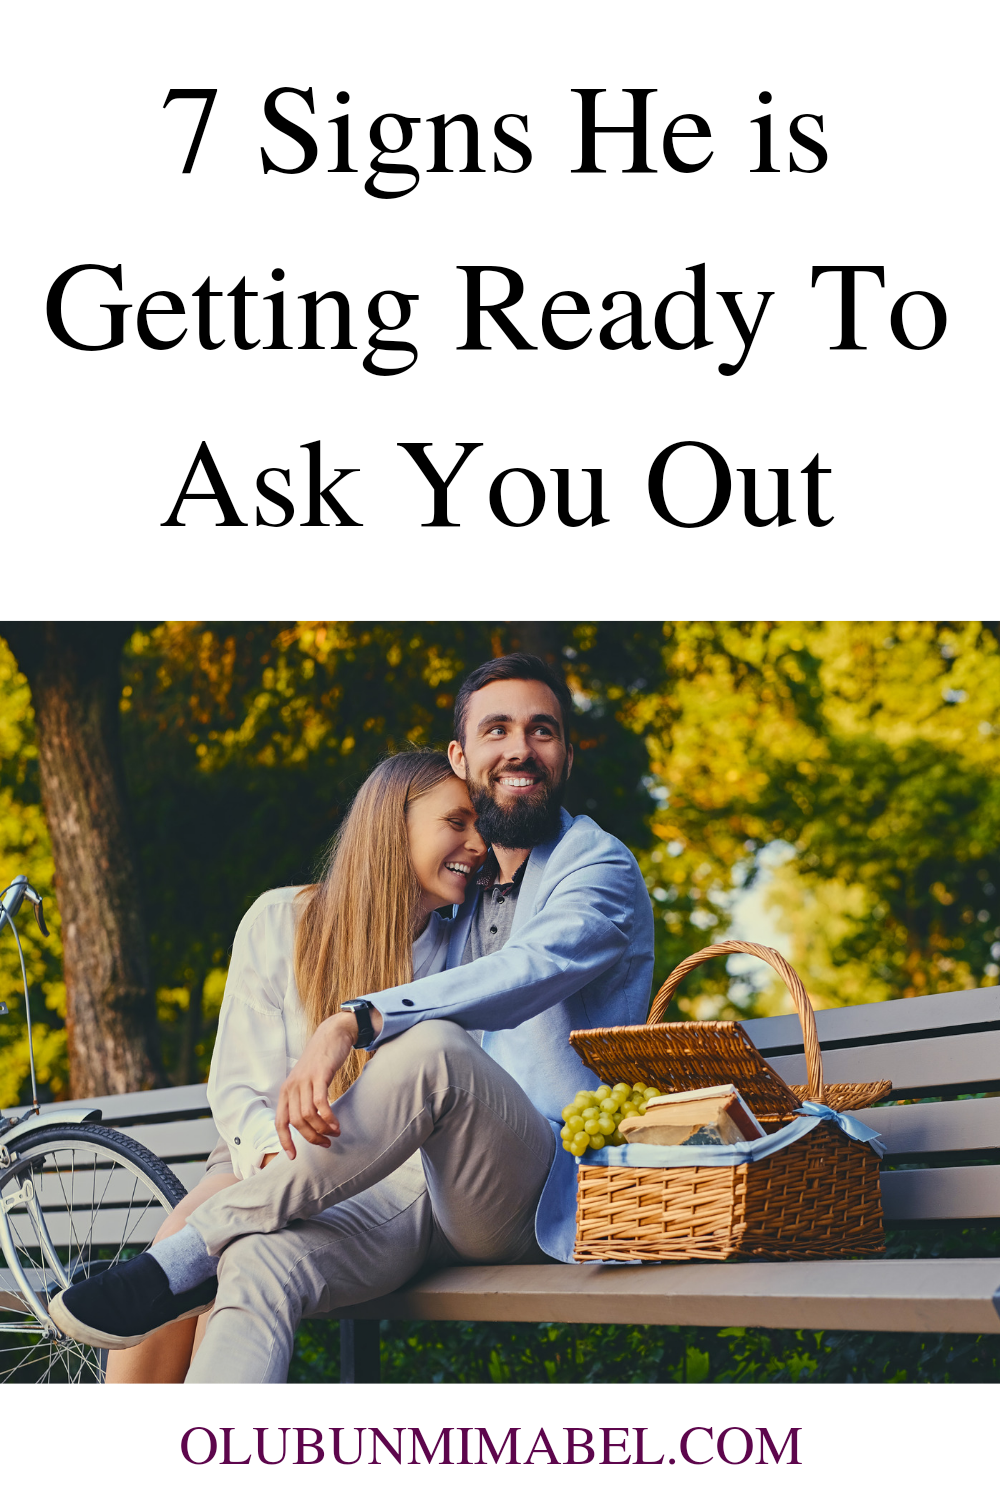 Signs He Is Getting Ready To Ask You Out